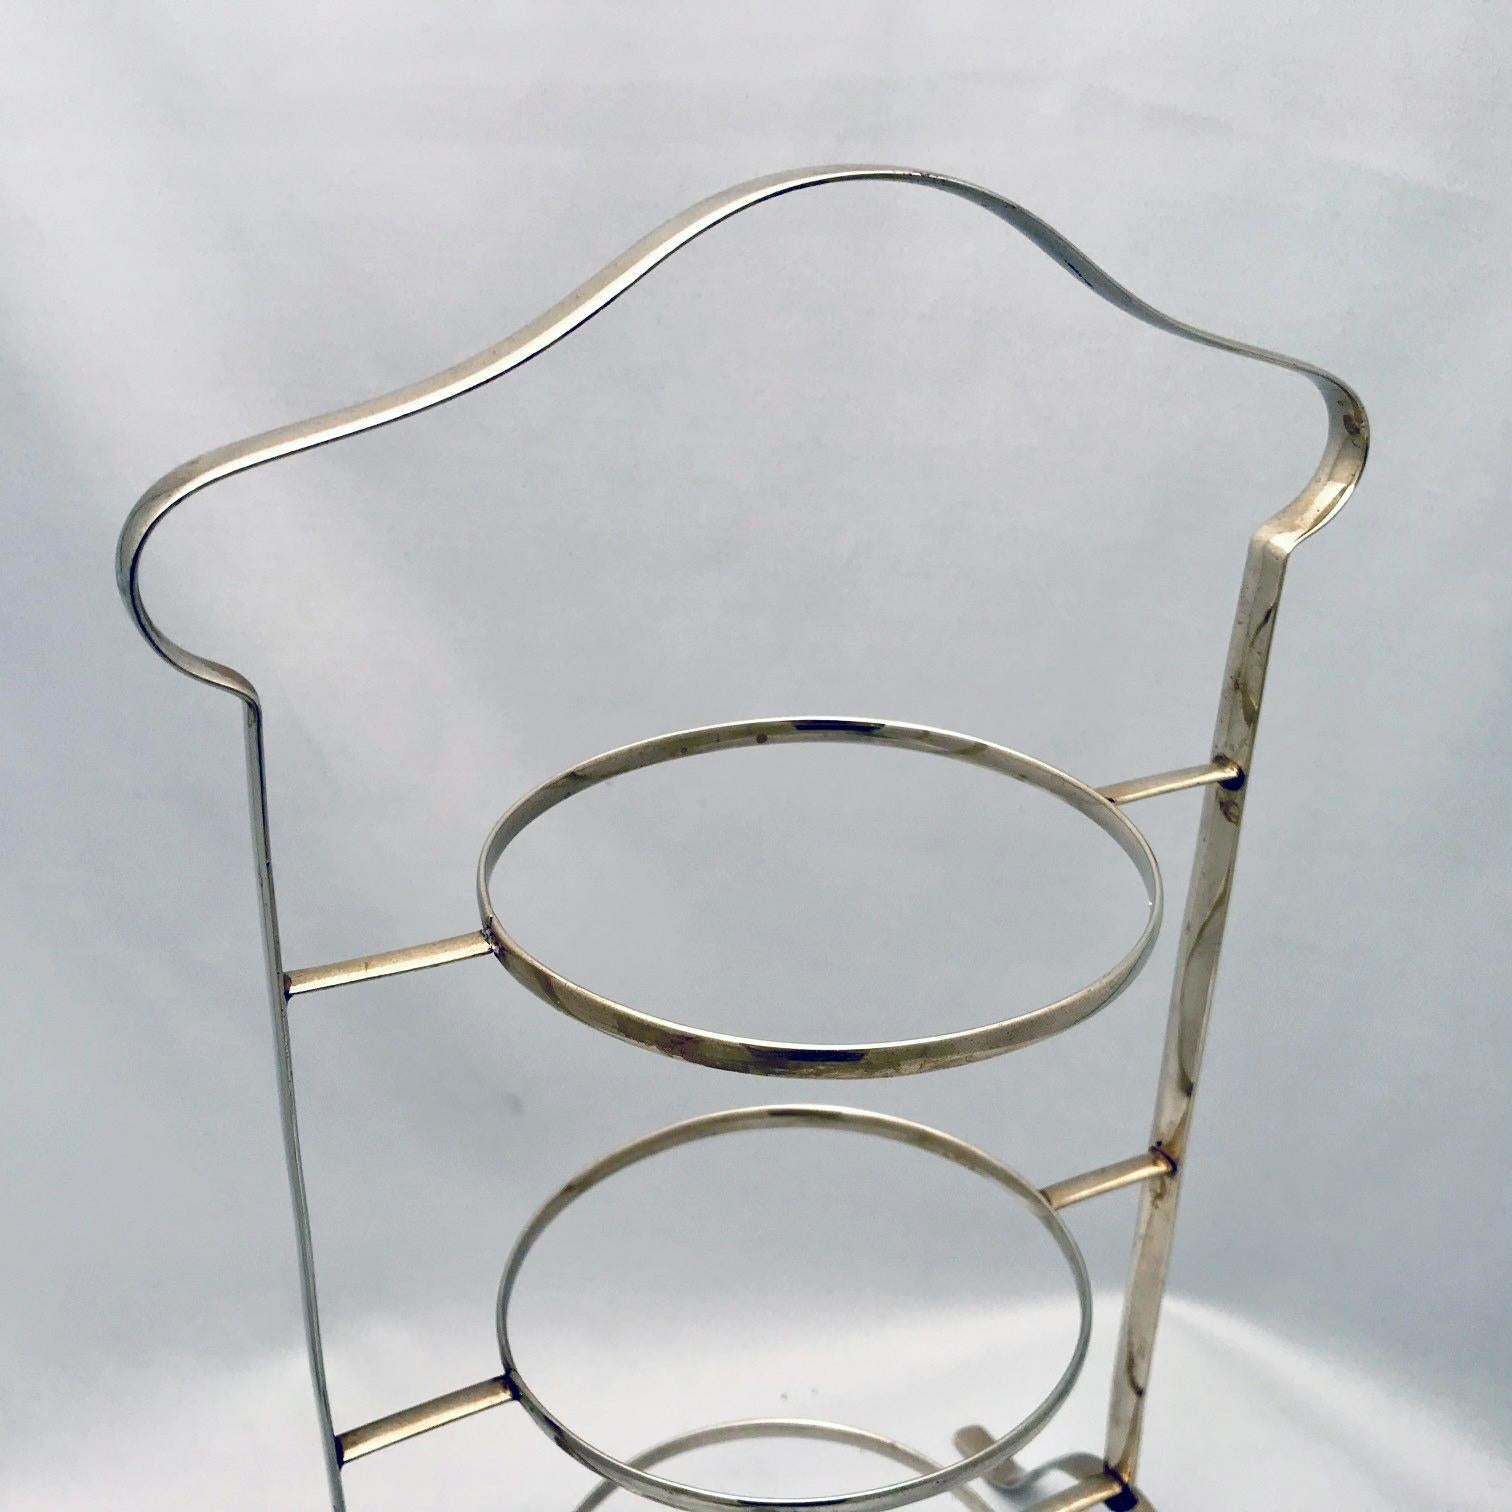 Hand-Crafted Art Deco, Three-Tier Silverplated Cake Stand